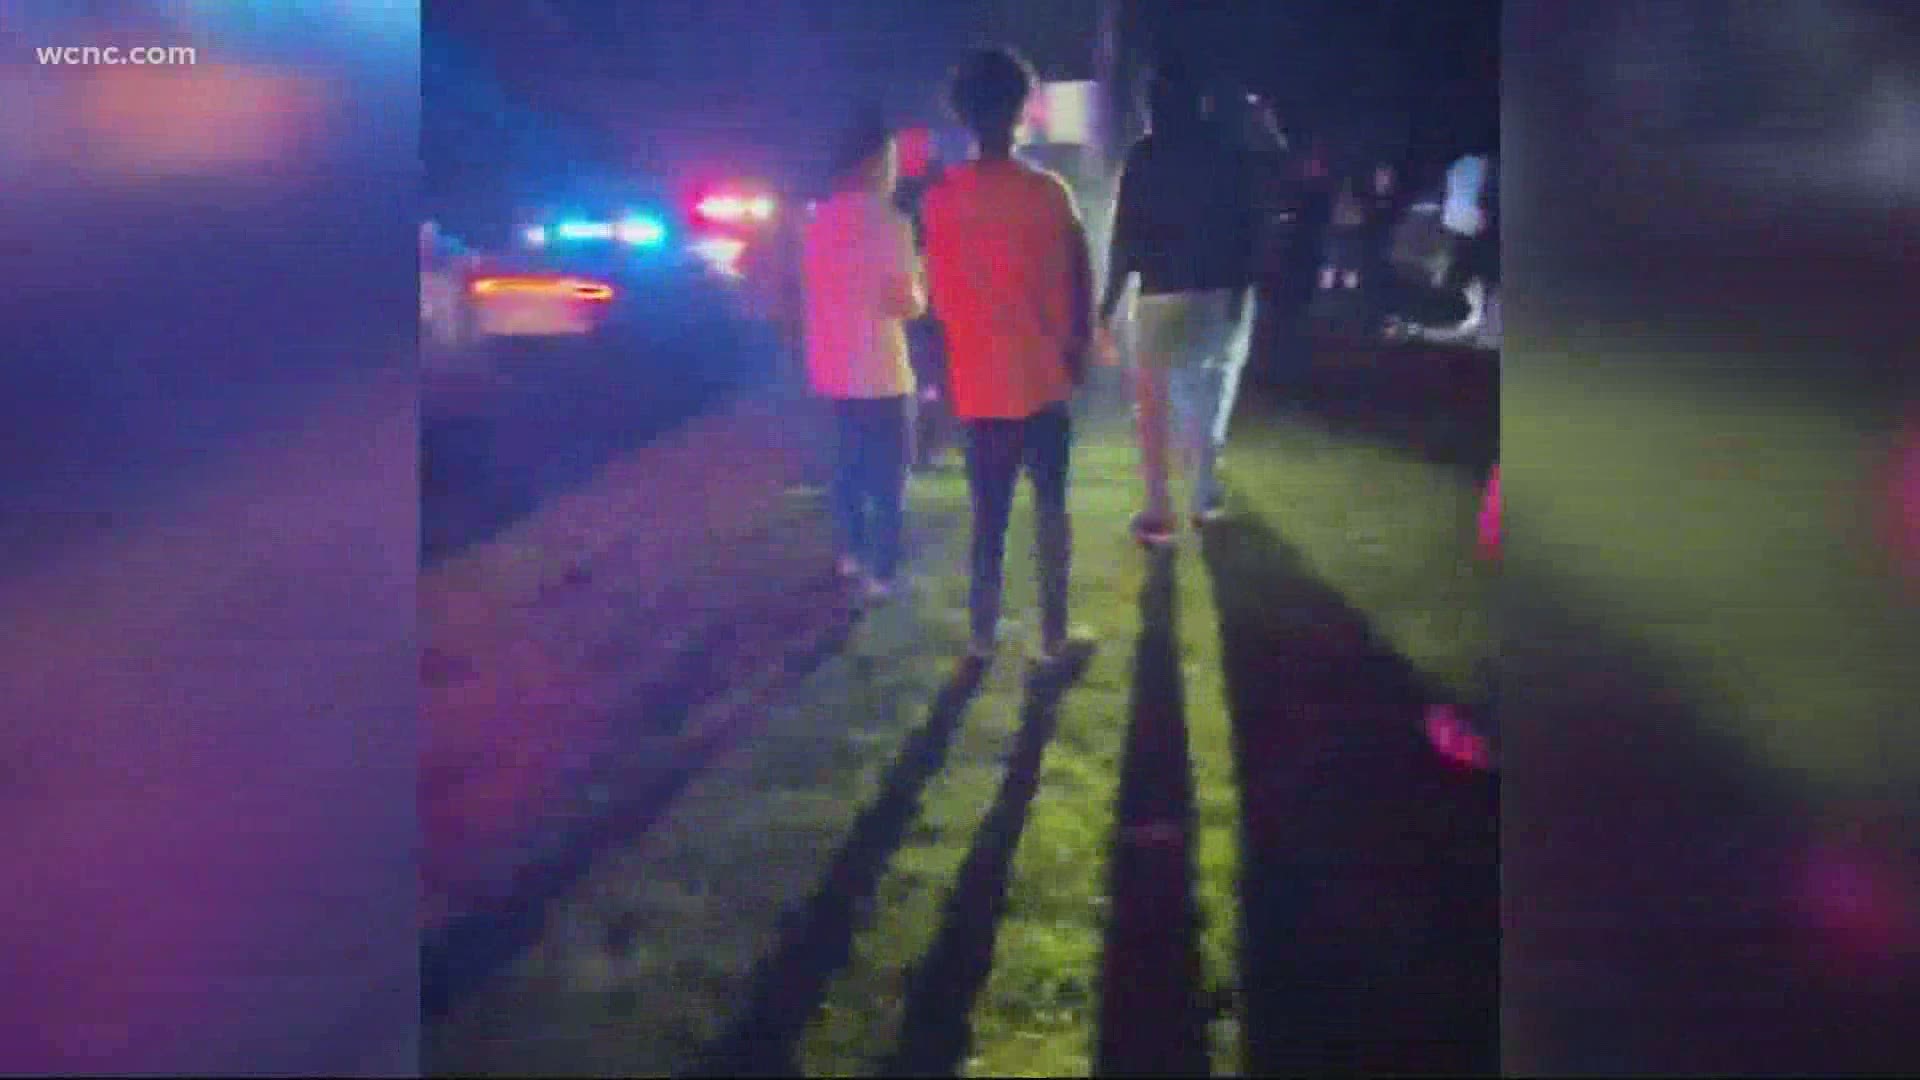 A popular Halloween attraction in Rowan County turned violent overnight. One person was injured after a shooting at Reapers Realm Haunted House and Trail.